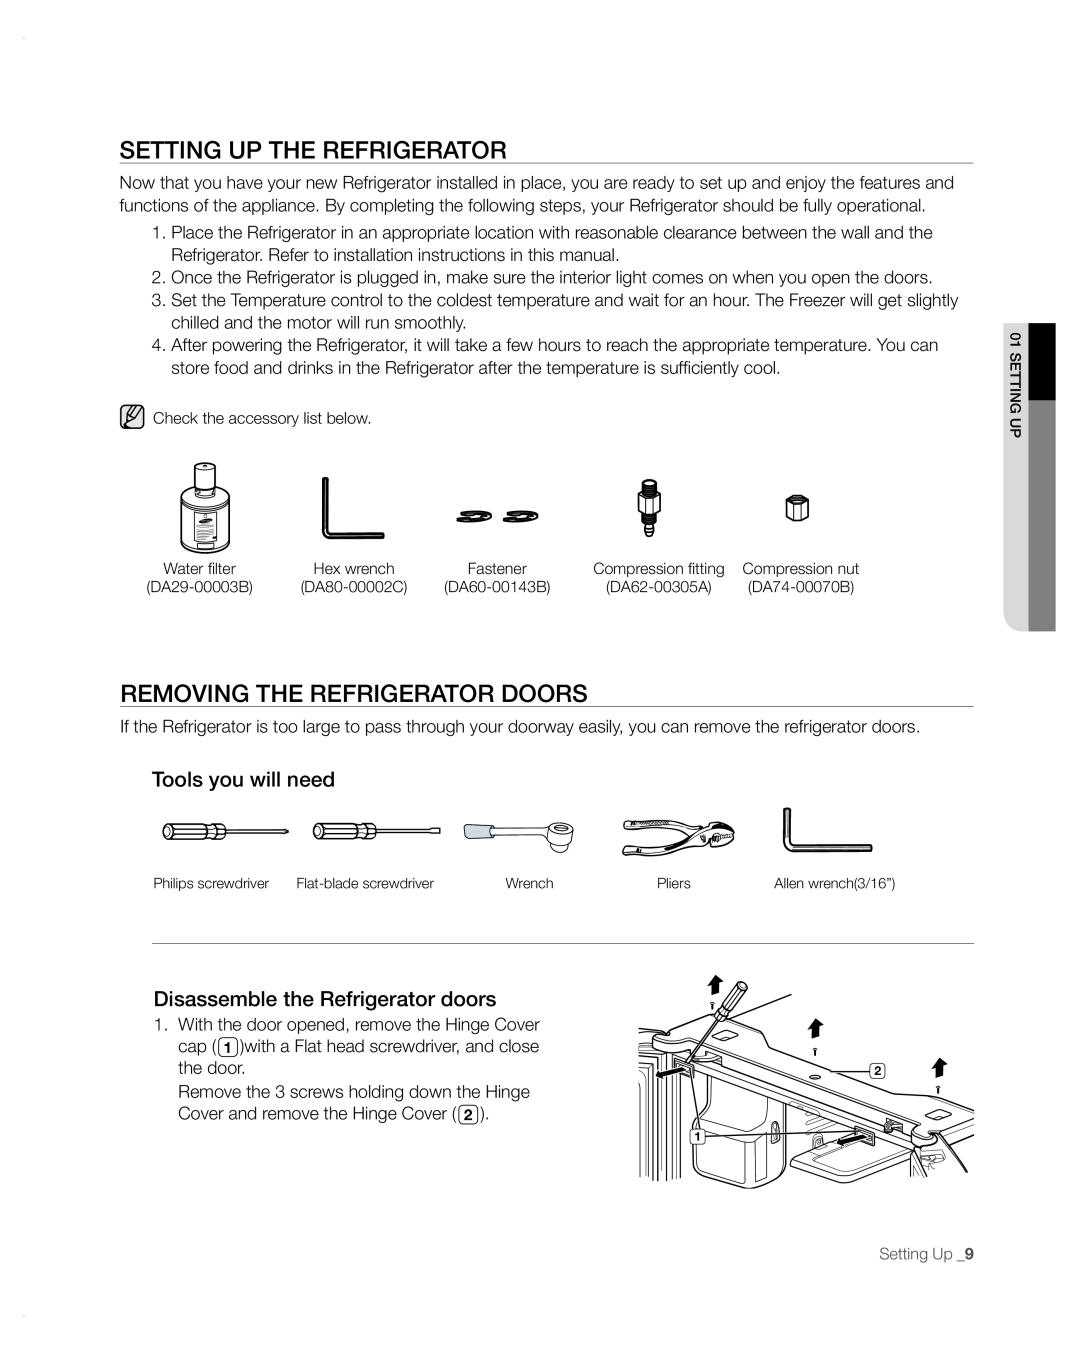 Samsung RFG297AA user manual setting uP tHe ReFRigeRAtoR, Removing the refrigerator doors, Tools you will need 